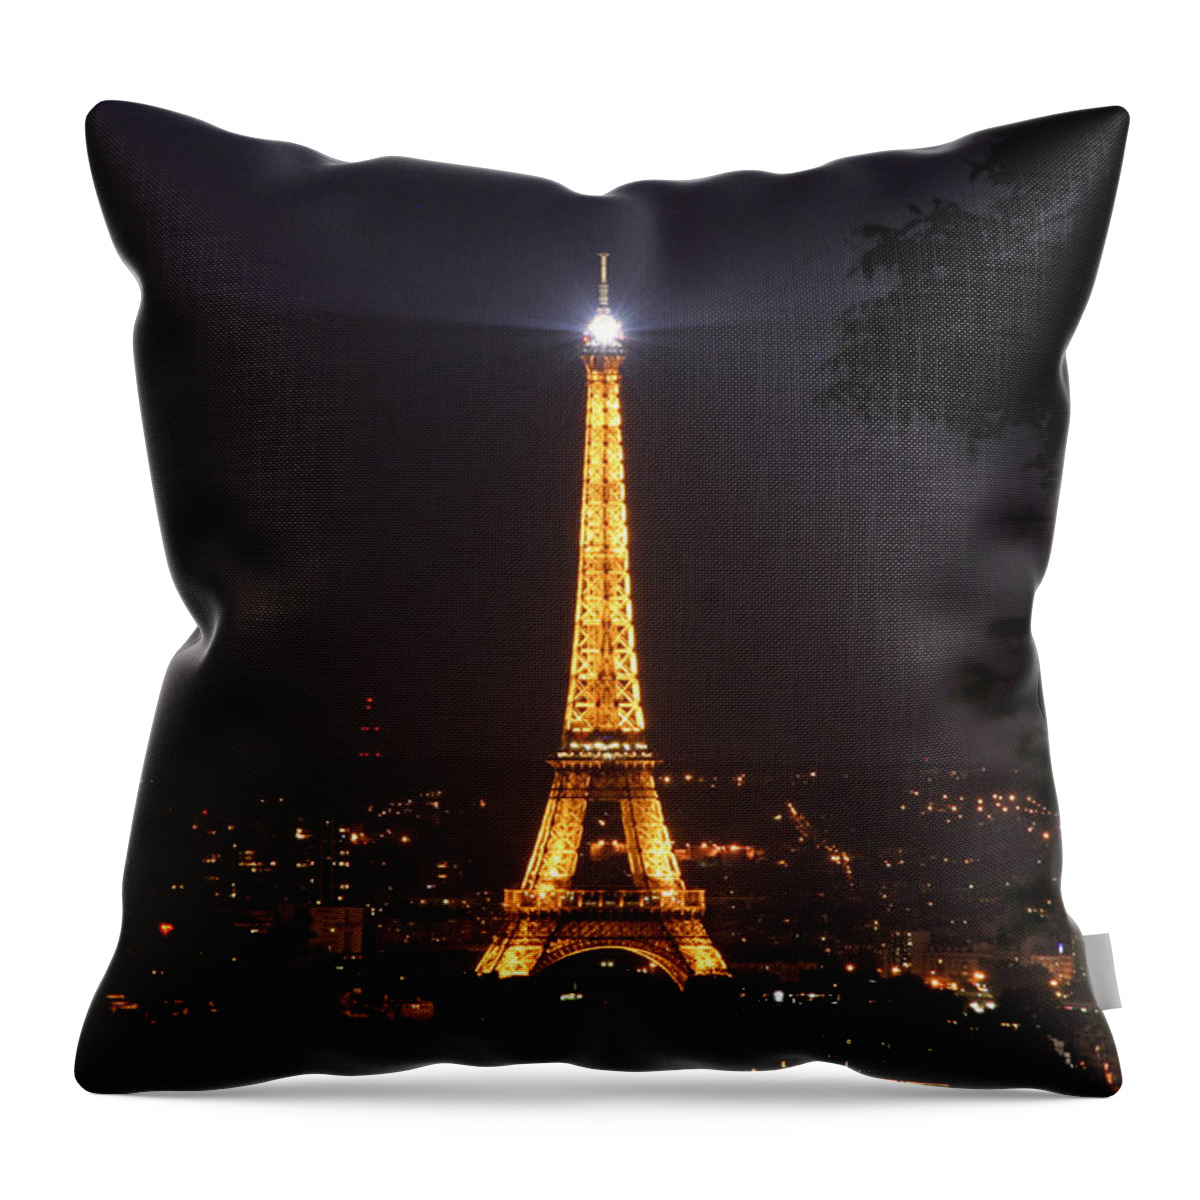 Eiffel Tower Throw Pillow featuring the photograph Eiffel Tower by Wes and Dotty Weber